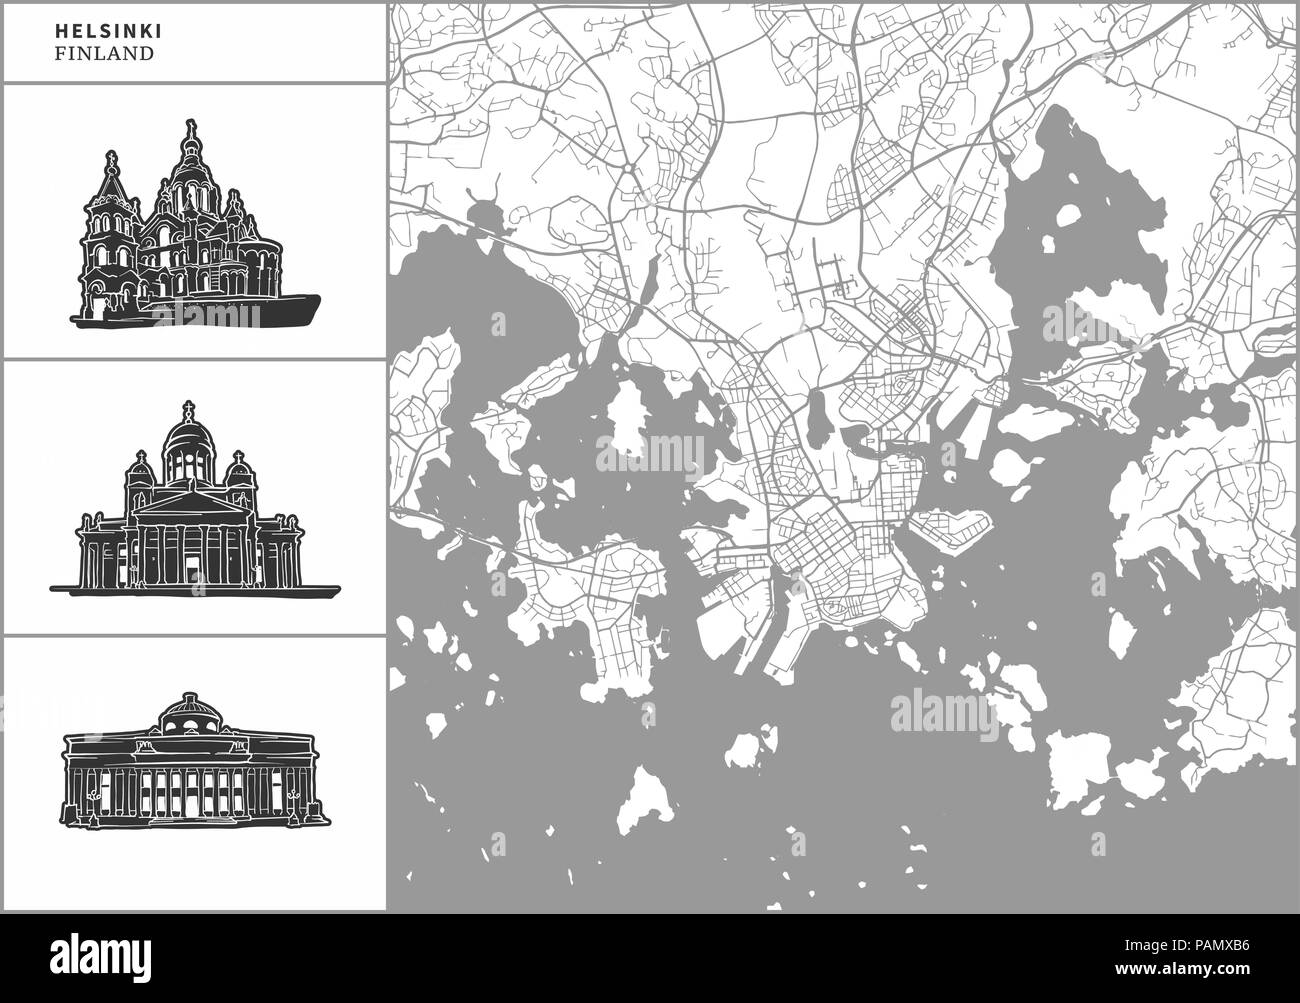 Helsinki city map with hand-drawn architecture icons. All drawigns, map and background separated for easy color change. Easy repositioning in vector v Stock Vector